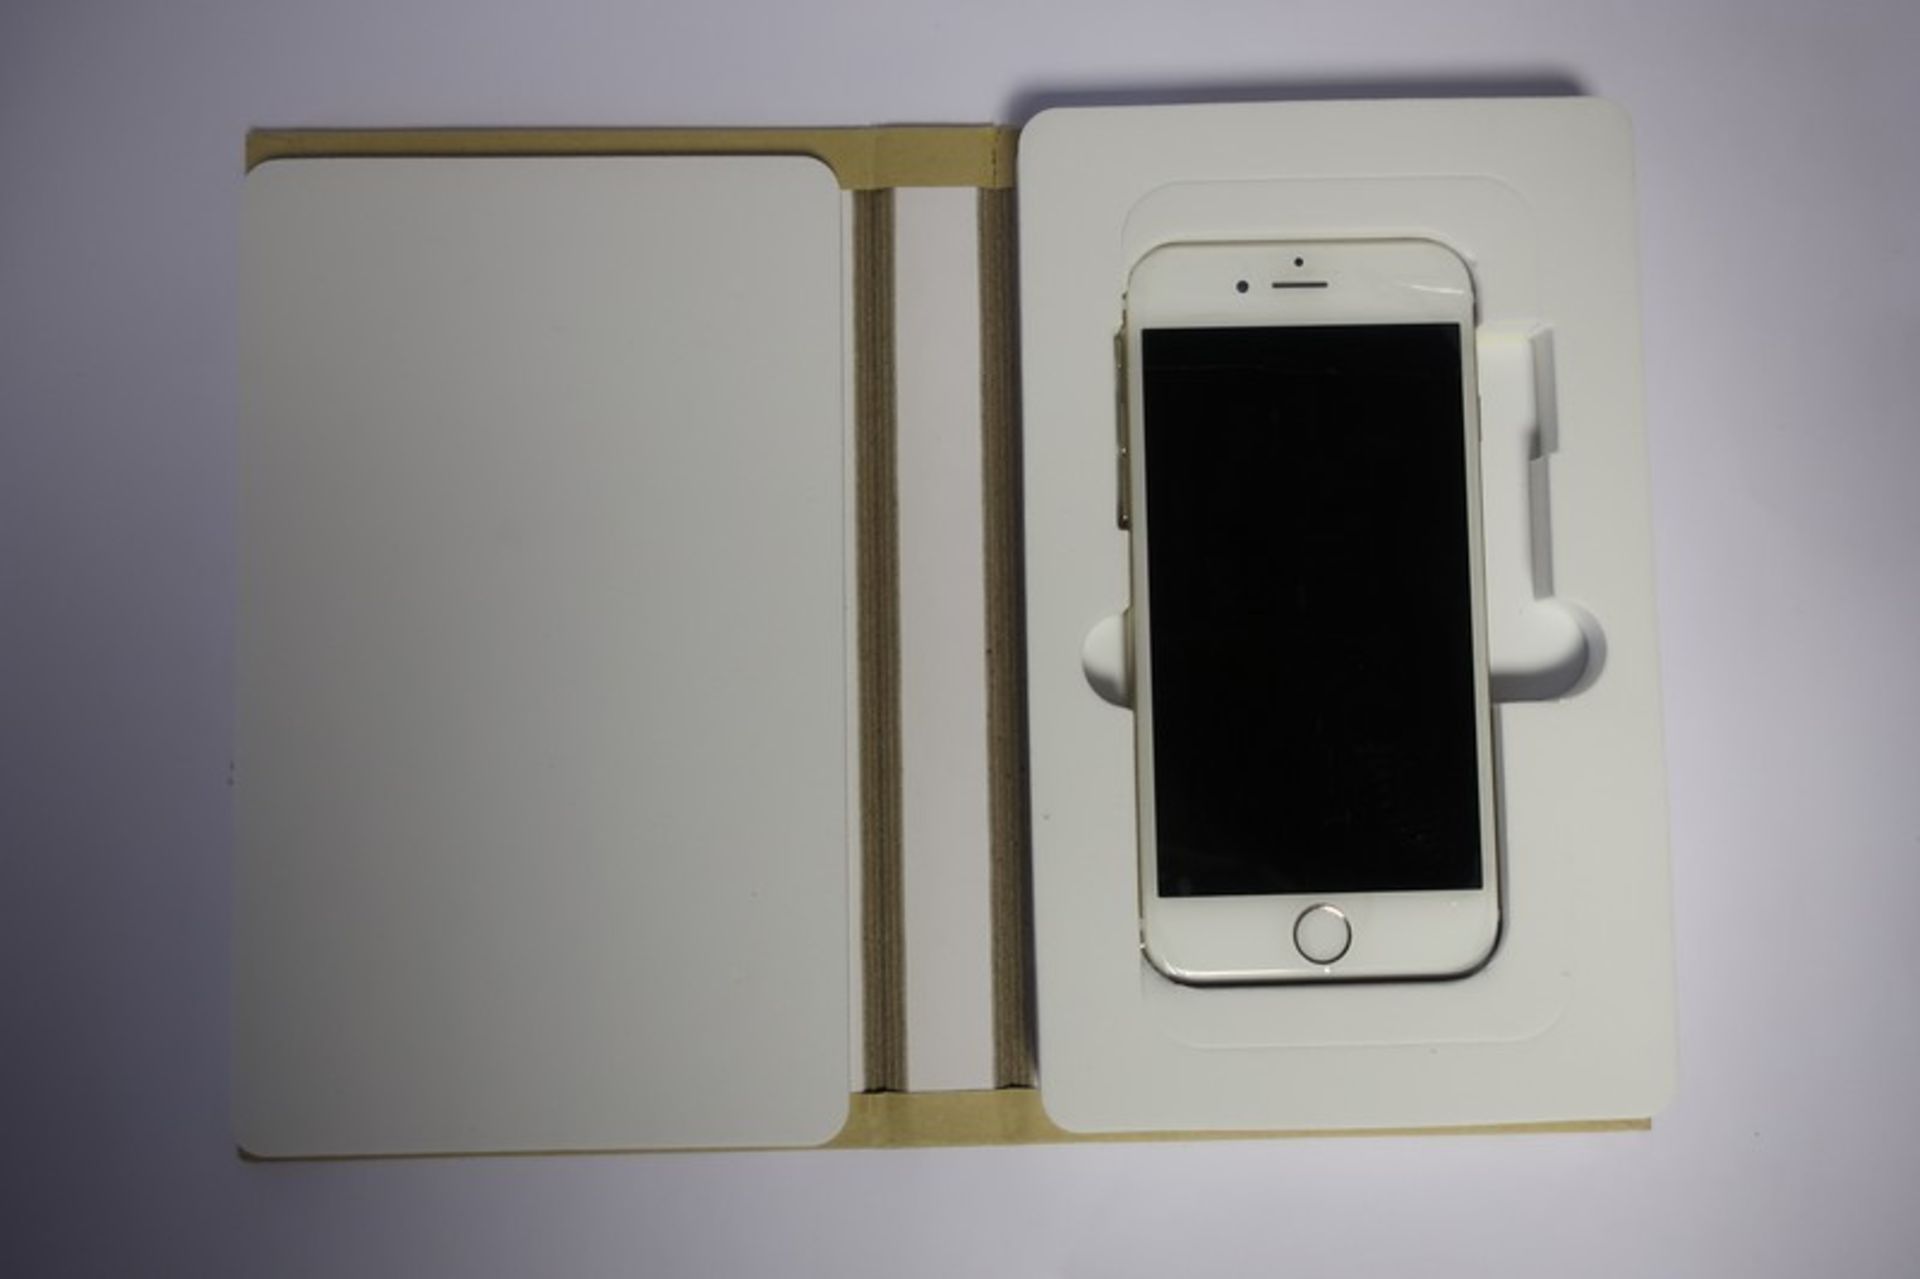 A refurbished iPhone 6 16GB in gold (IMEI 354429069797465 Activation Clear).